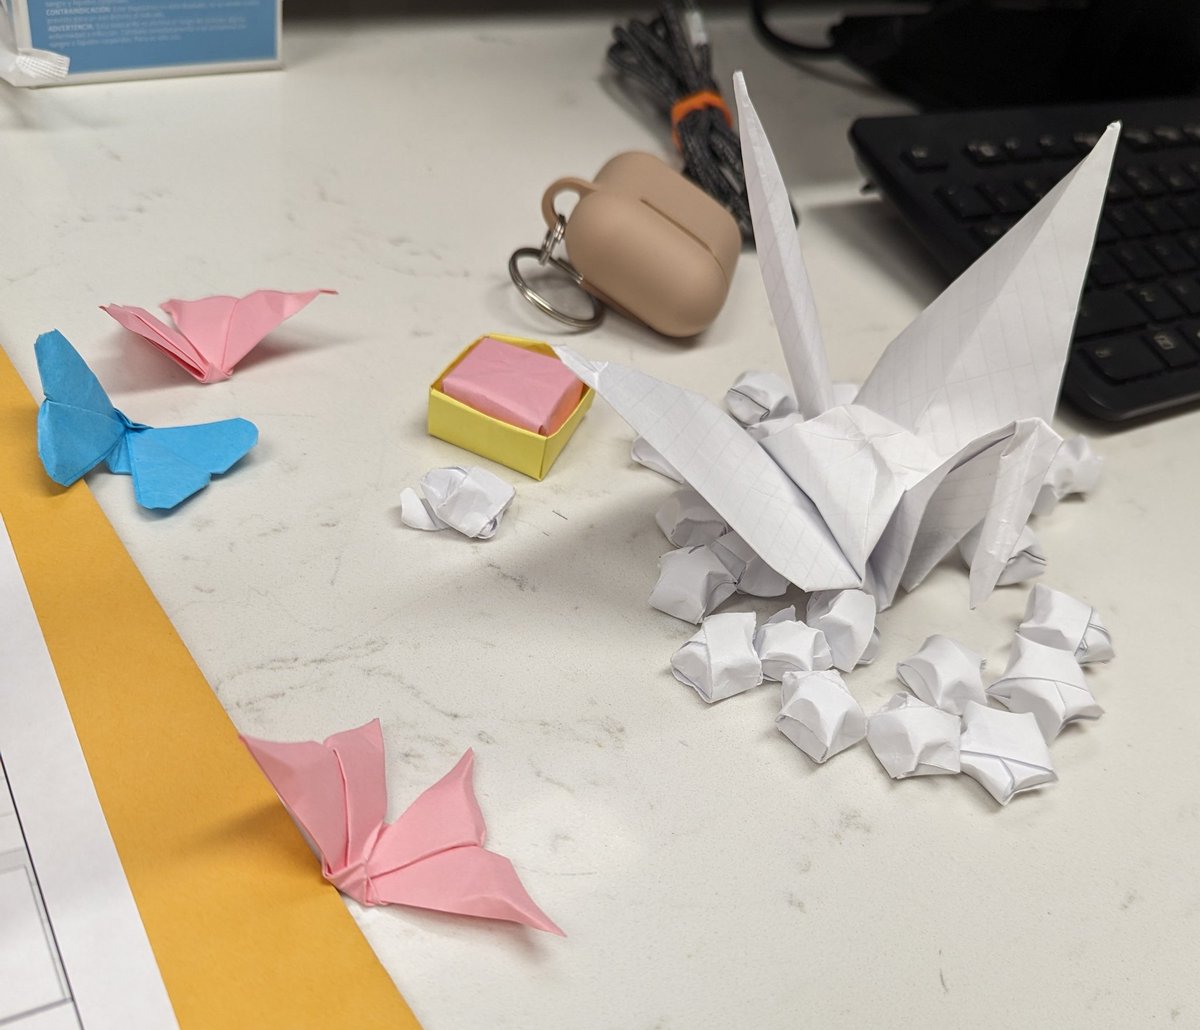 When nightshift has downtime, we make origami! 😂 But don't be fooled, were actually VERY busy 🙃 #NursingHome #RespiratoryTherapy #RehabilitationCenter